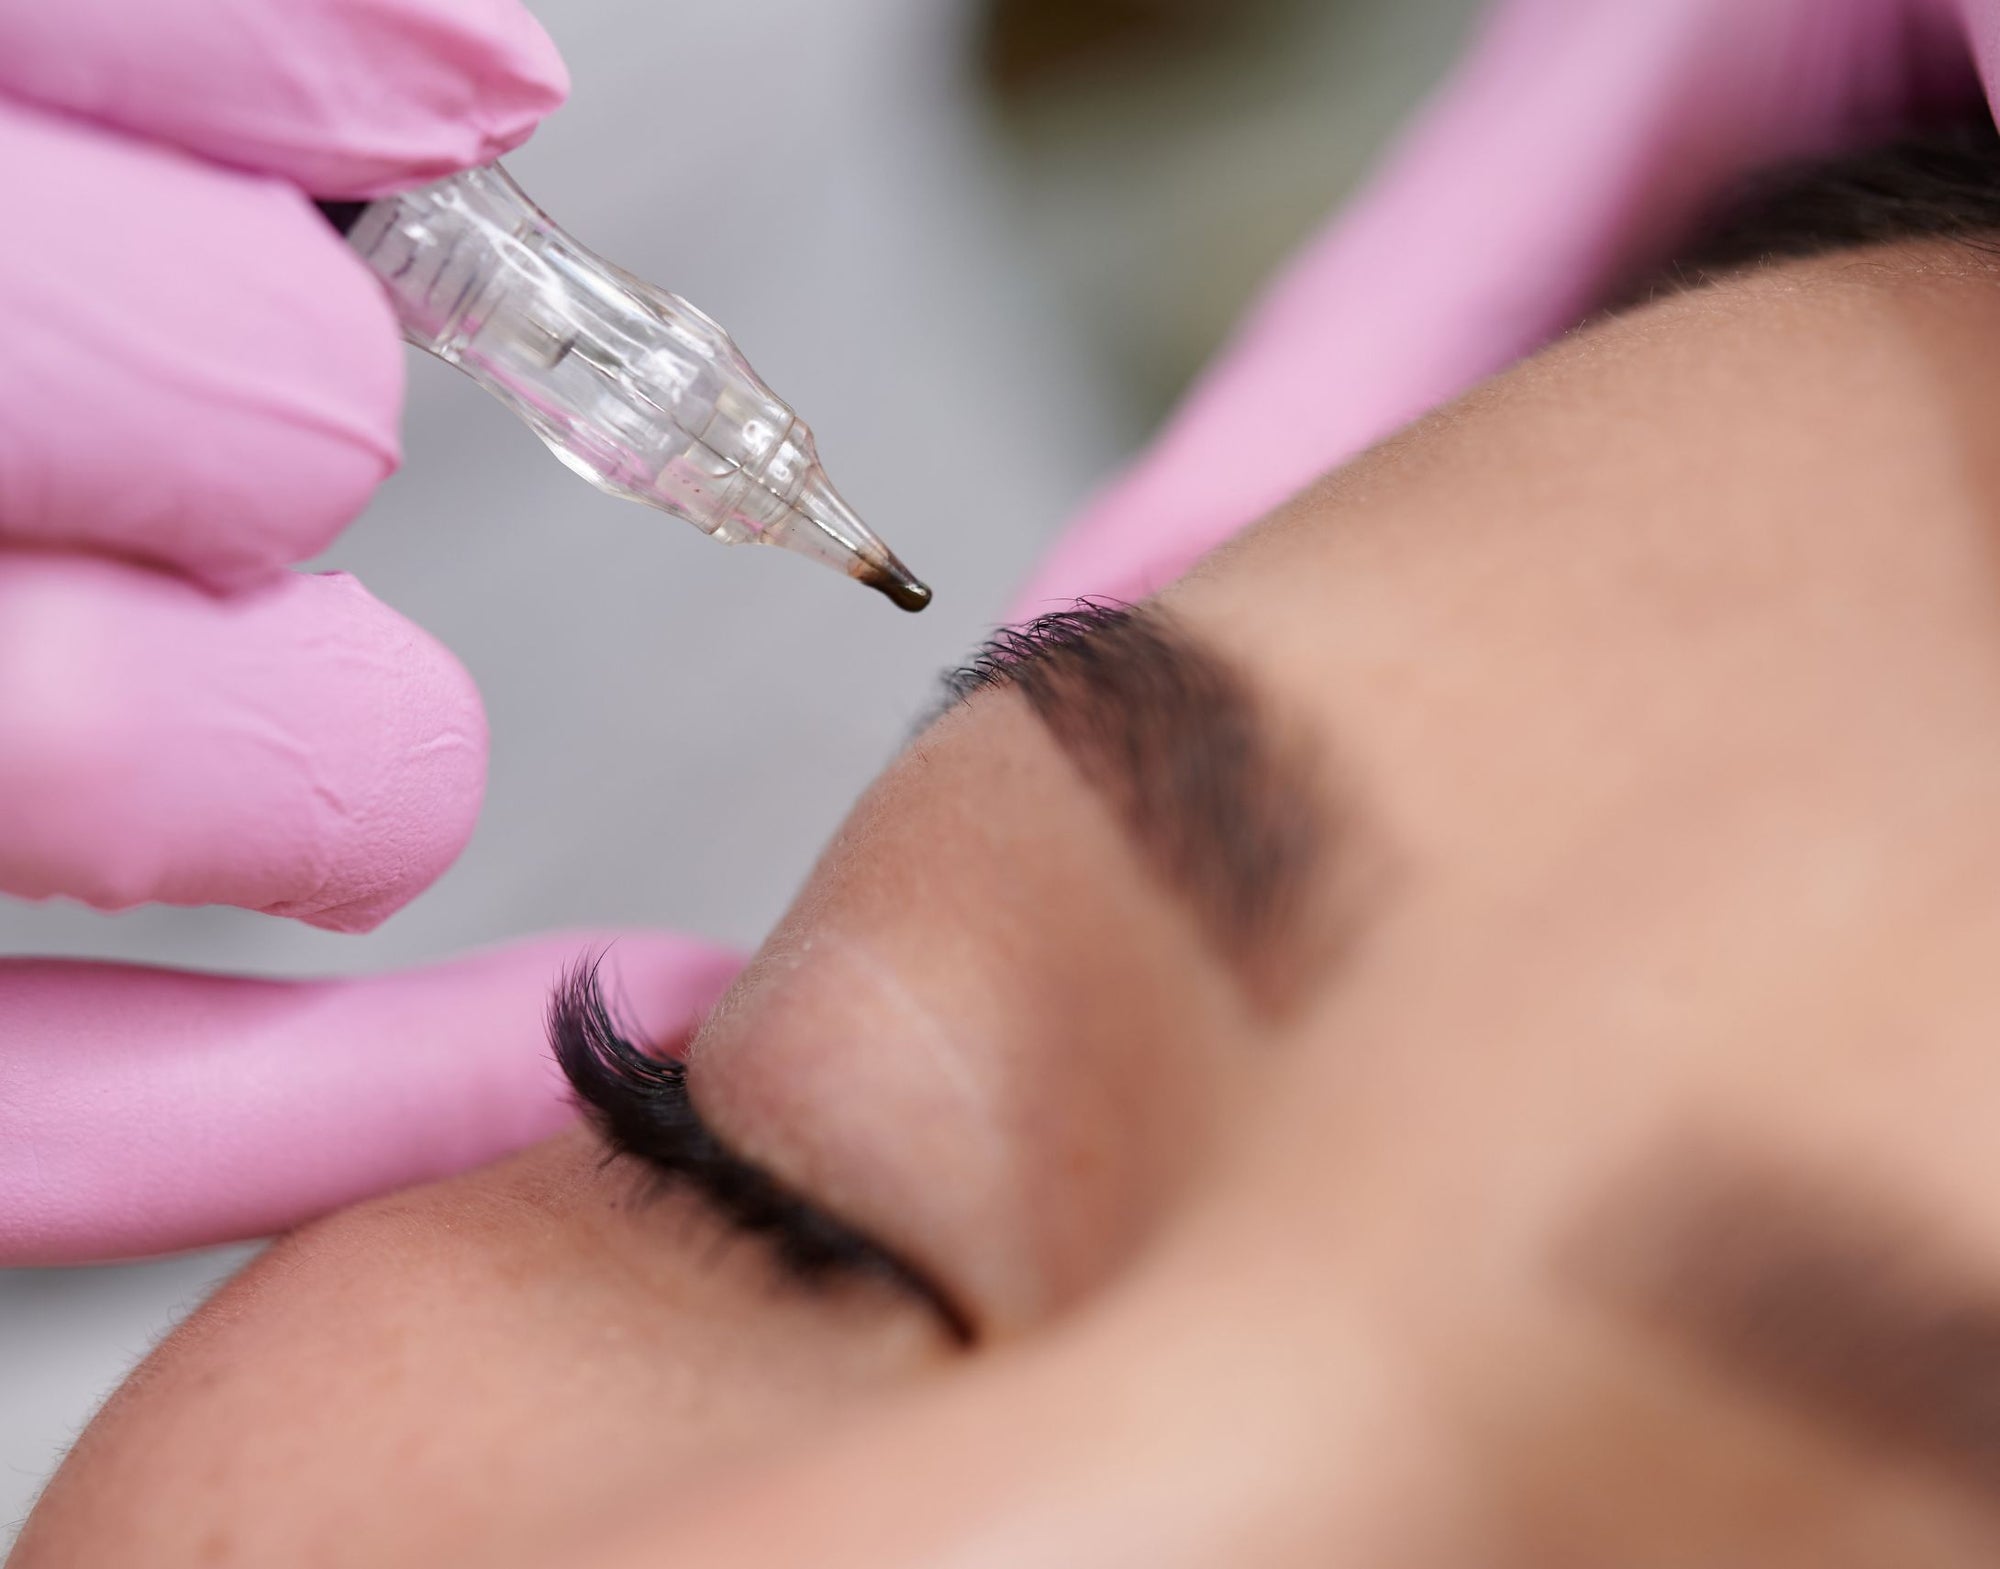 Things You Should Know Before Microblading Your Brows